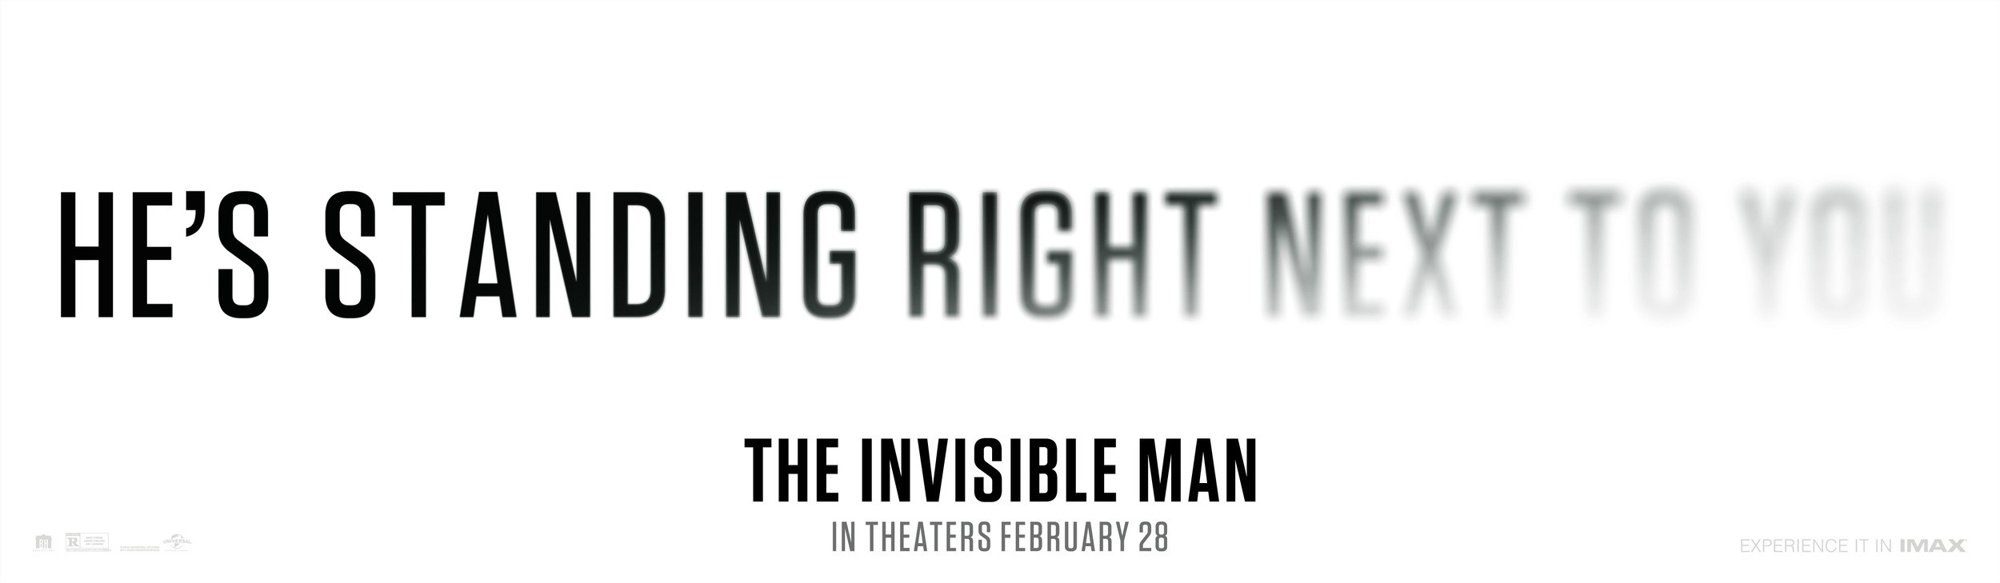 Poster of Universal Pictures' The Invisible Man (2020)